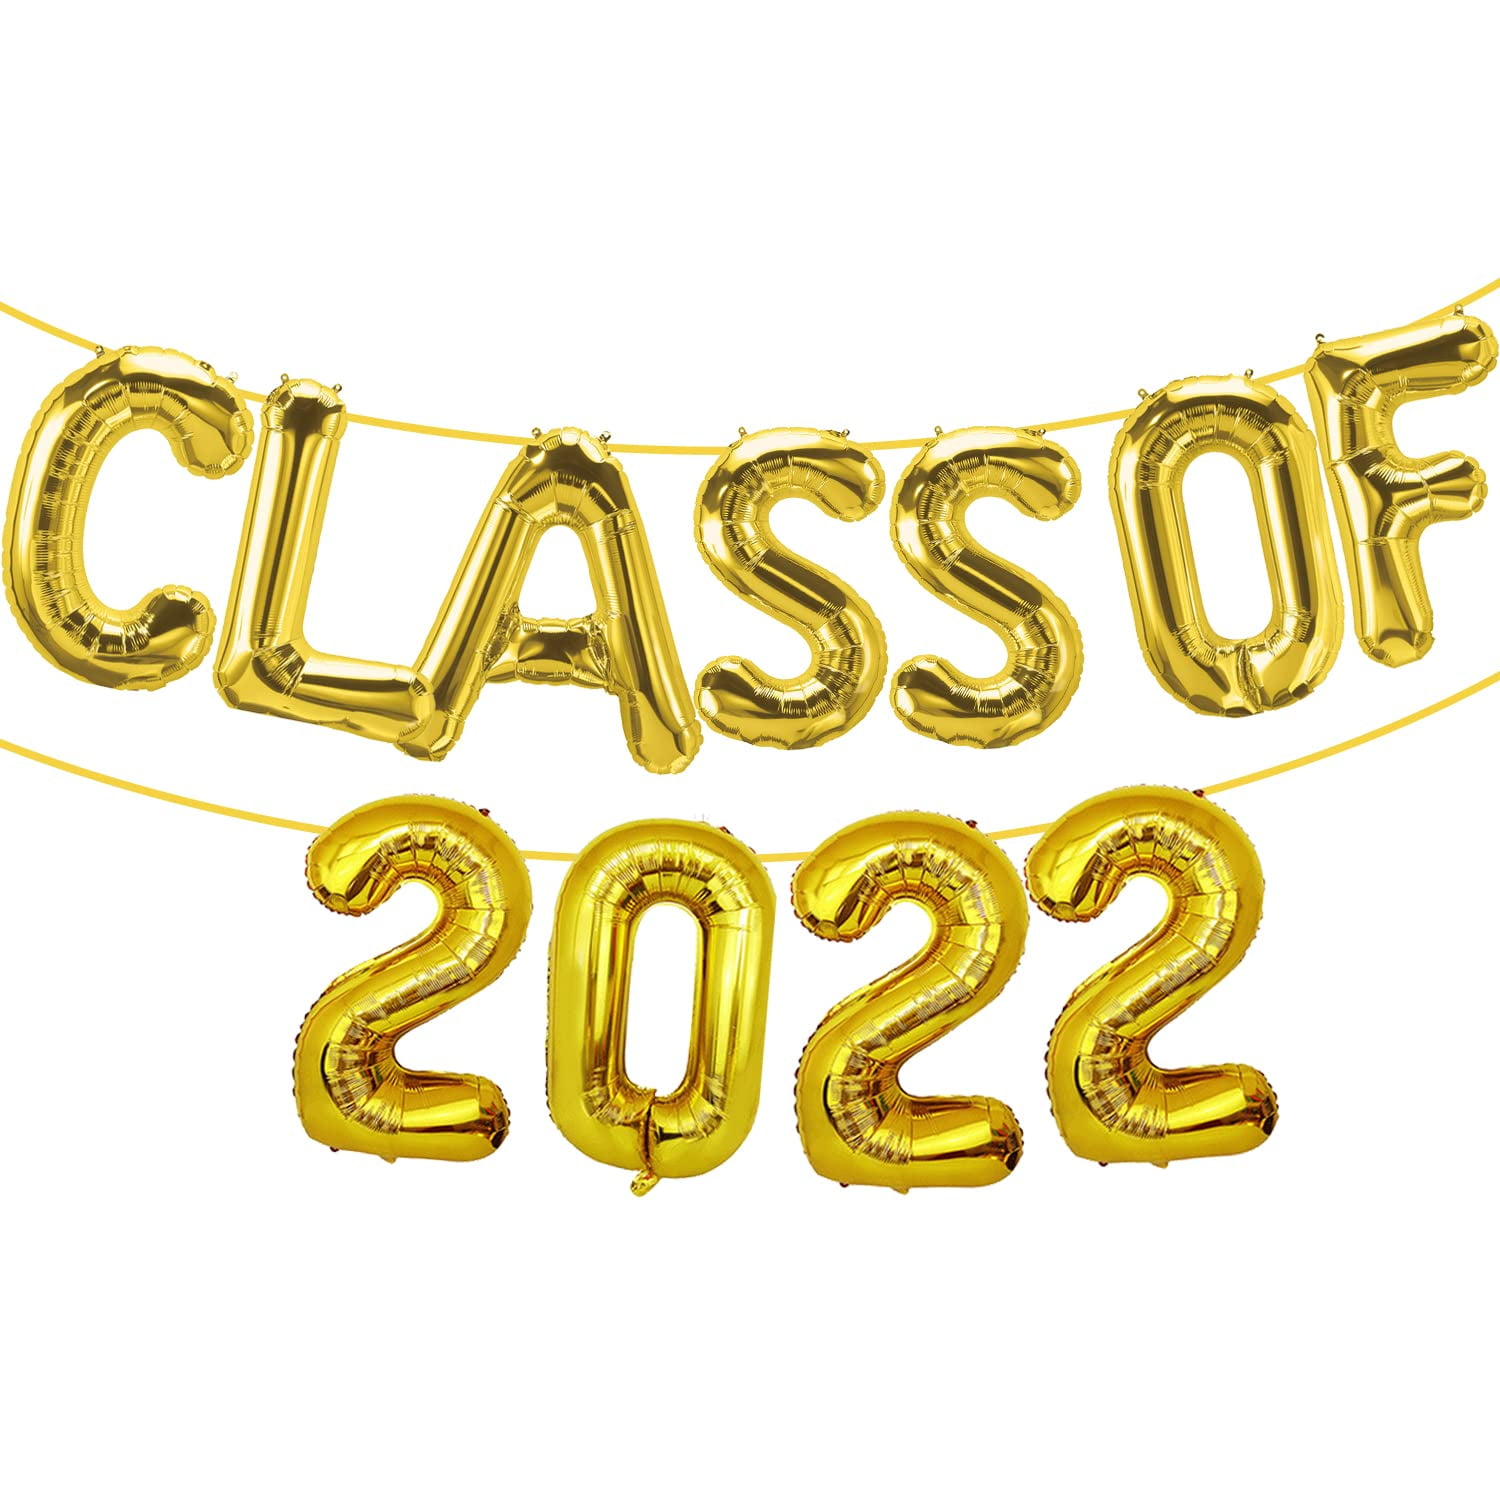 Black & Gold Numbers CLASS OF 2019 Graduation Party Balloons Decoration Supplies 